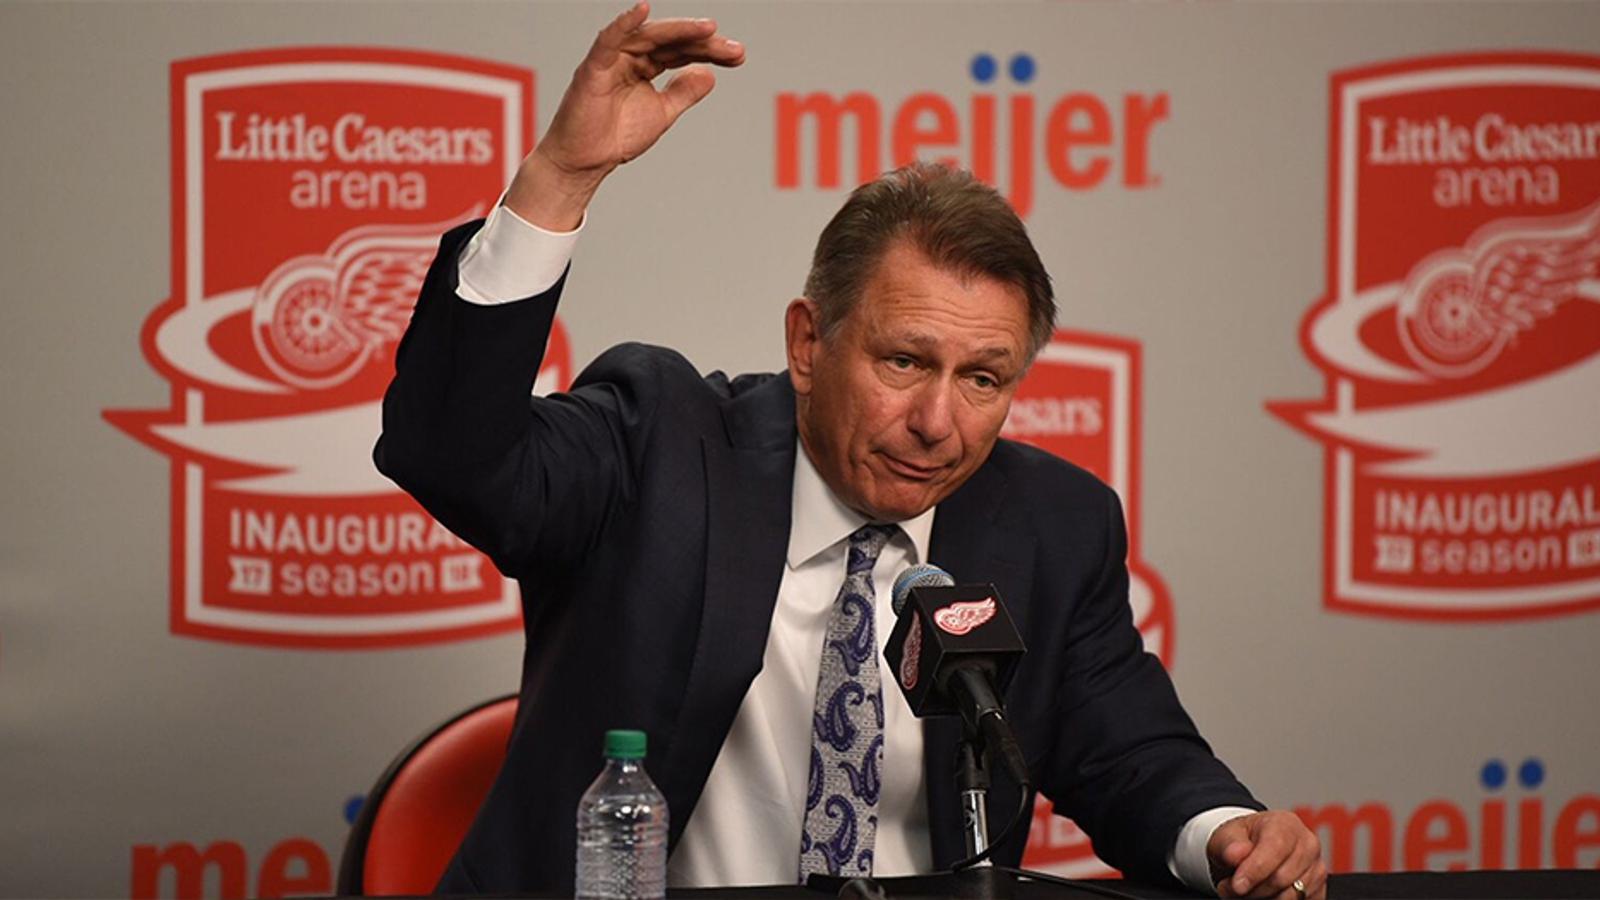 Flashback: Ken Holland reveals Red Wings nearly selected Pavel Bure in 1989 Draft 